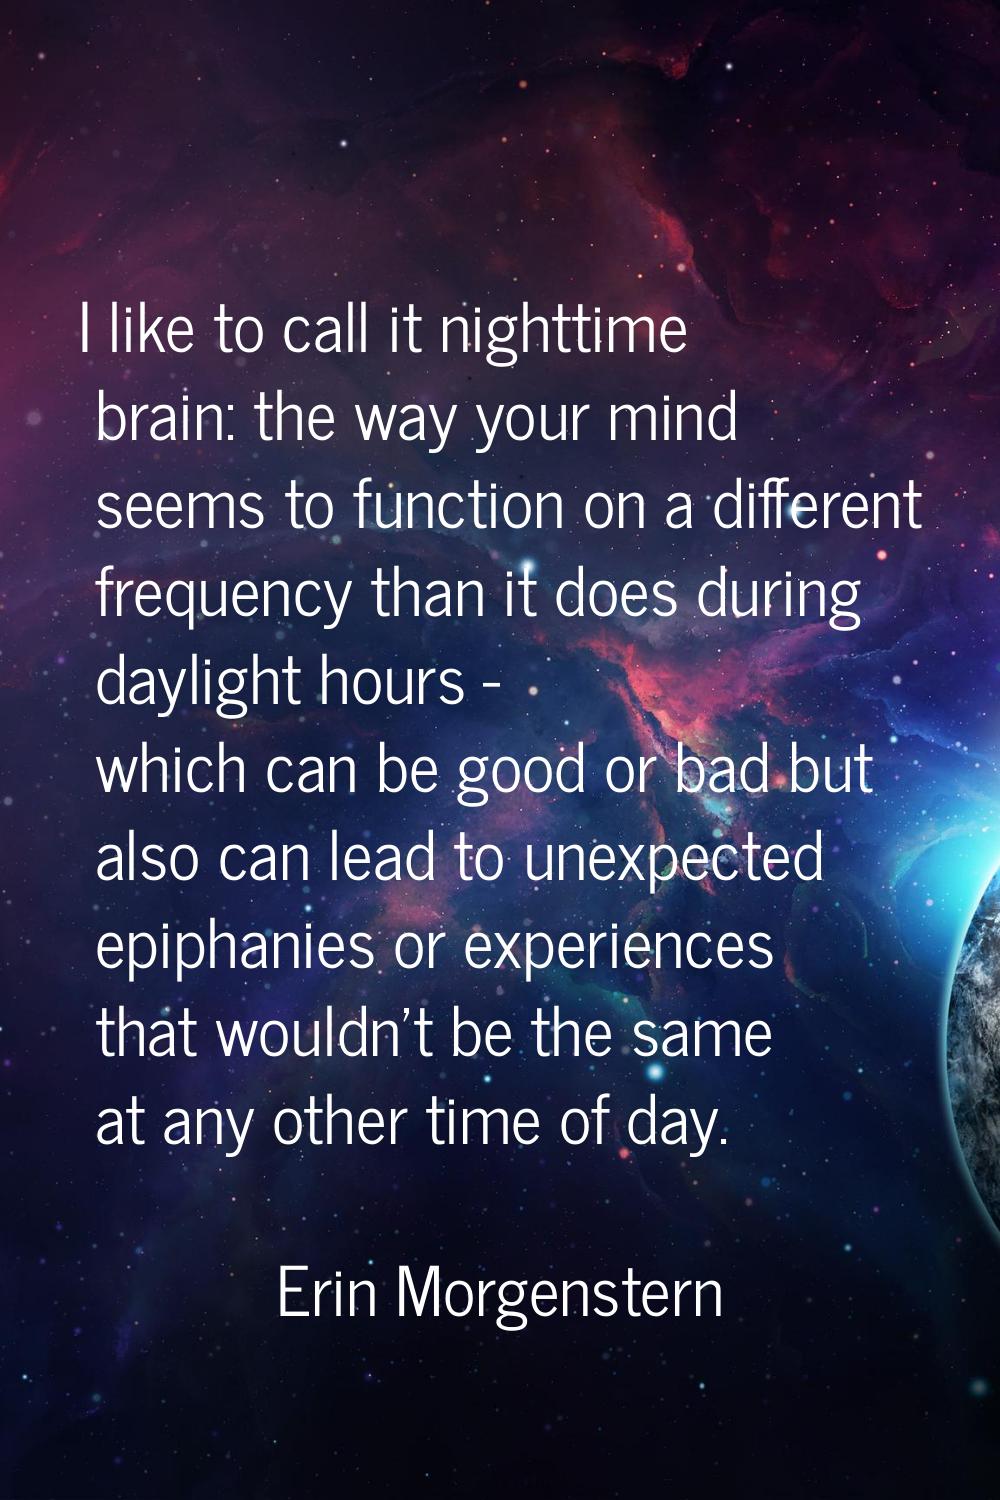 I like to call it nighttime brain: the way your mind seems to function on a different frequency tha